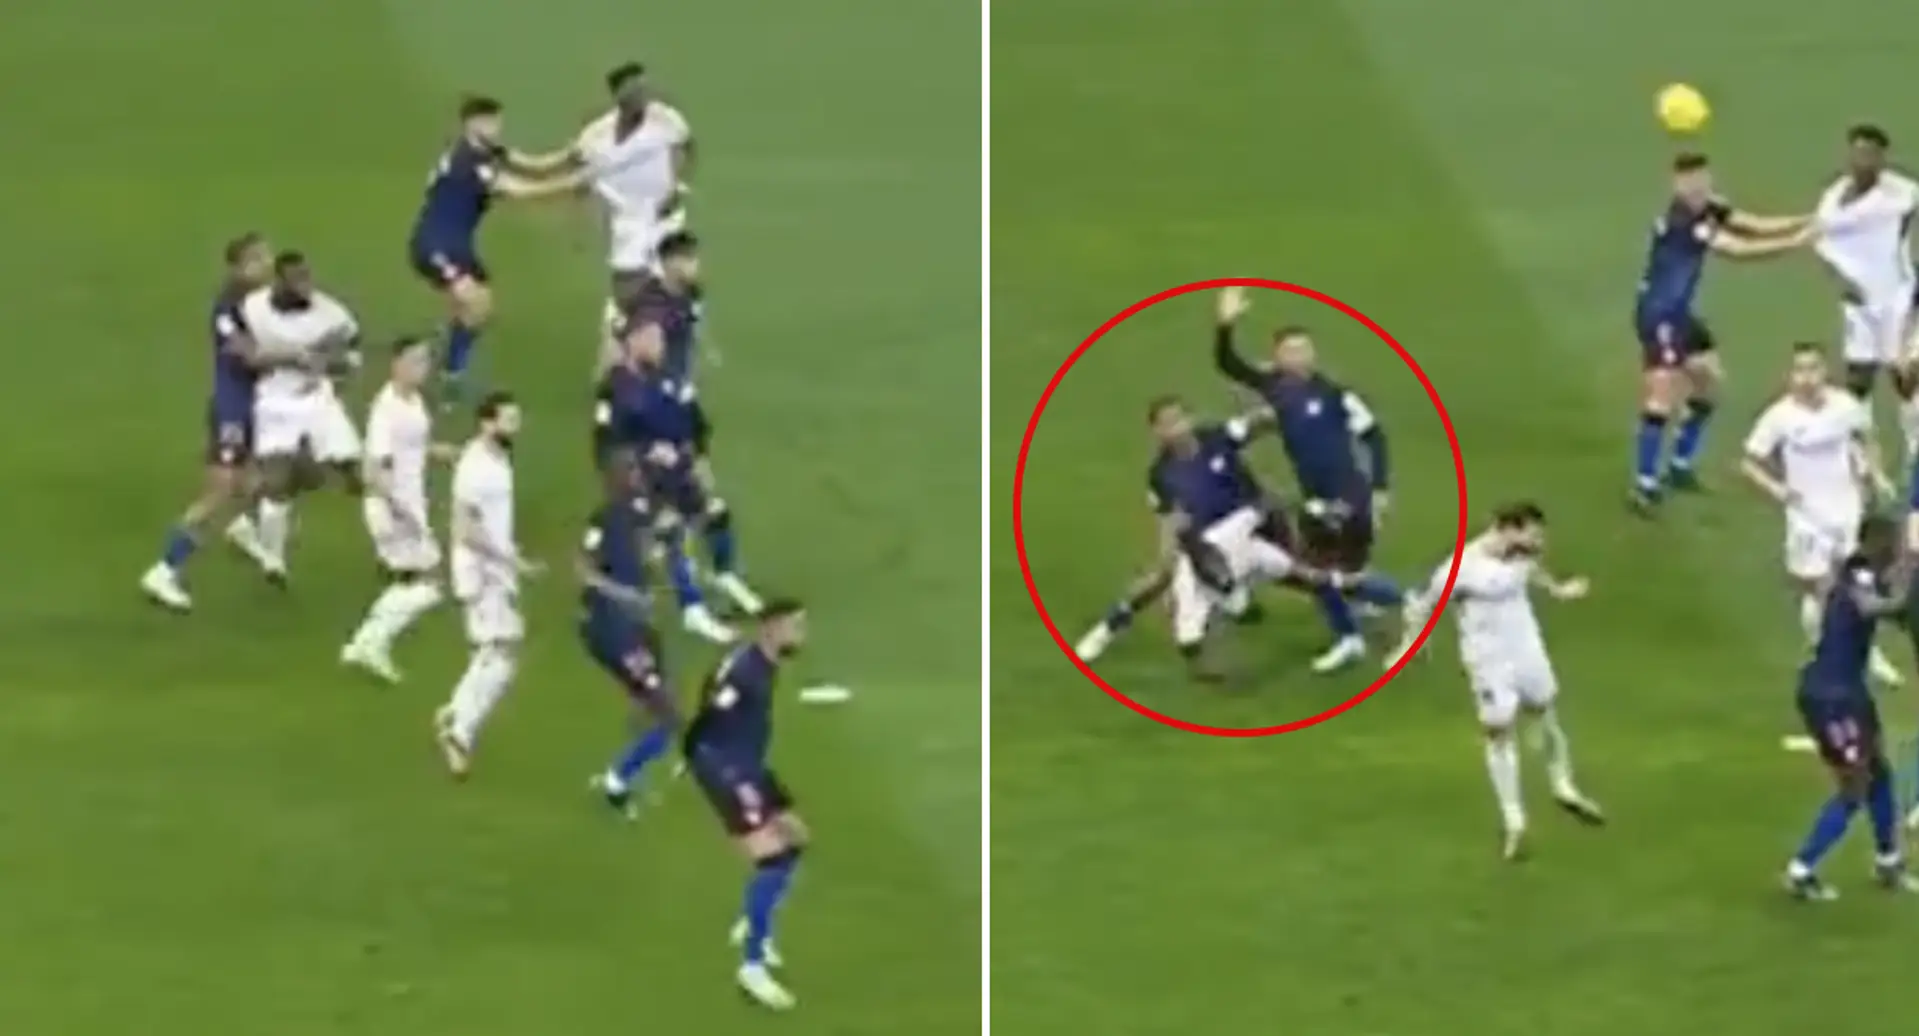 Rudiger pulled to ground by Sevilla player in penalty box — not even a VAR check